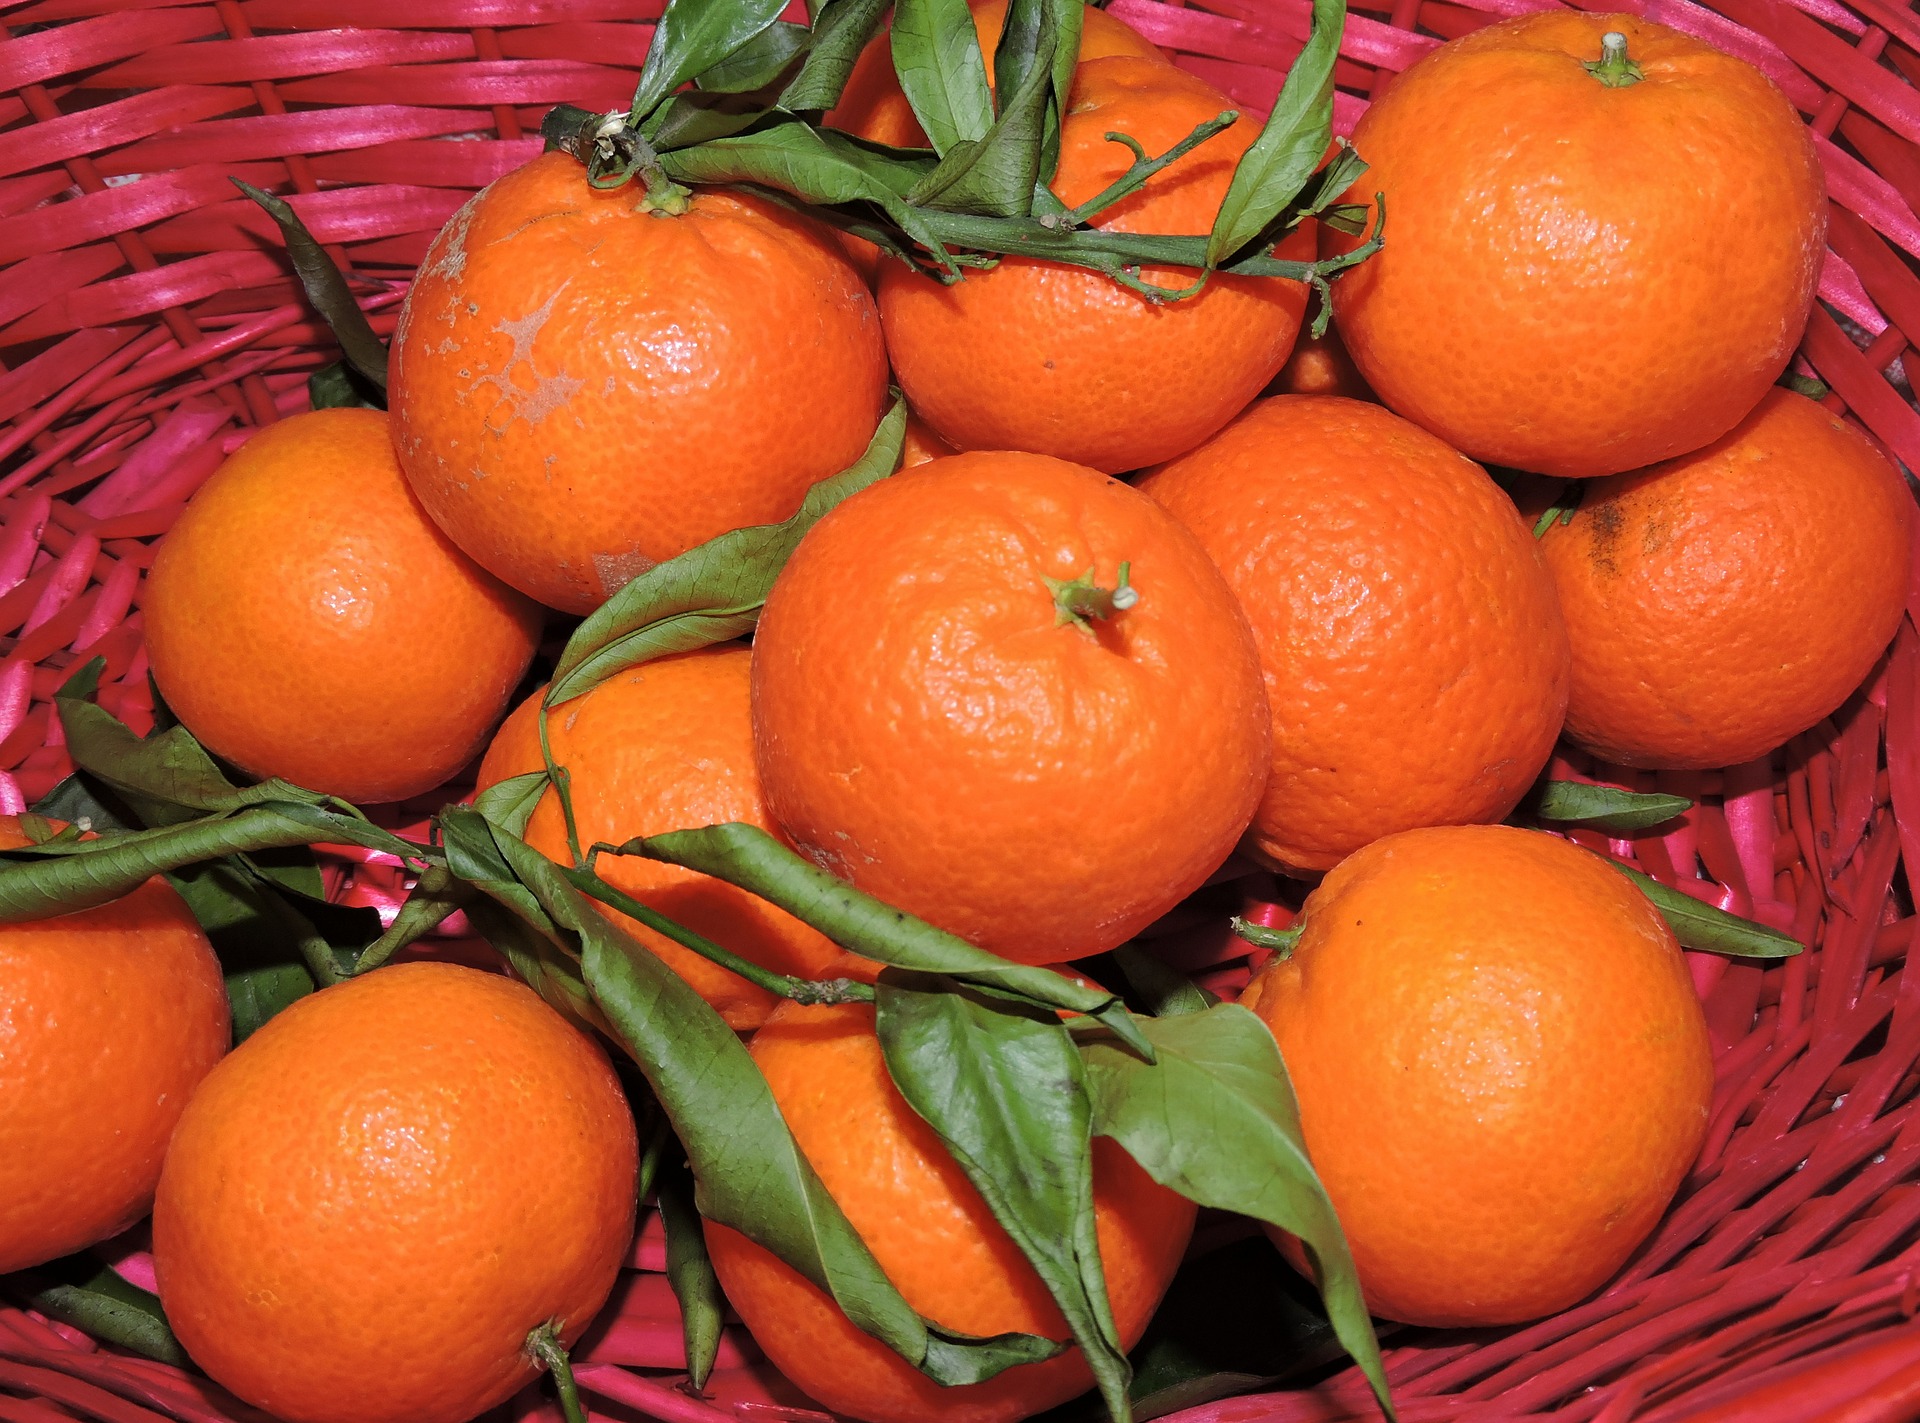 What Are The Health Benefits Of Oranges?